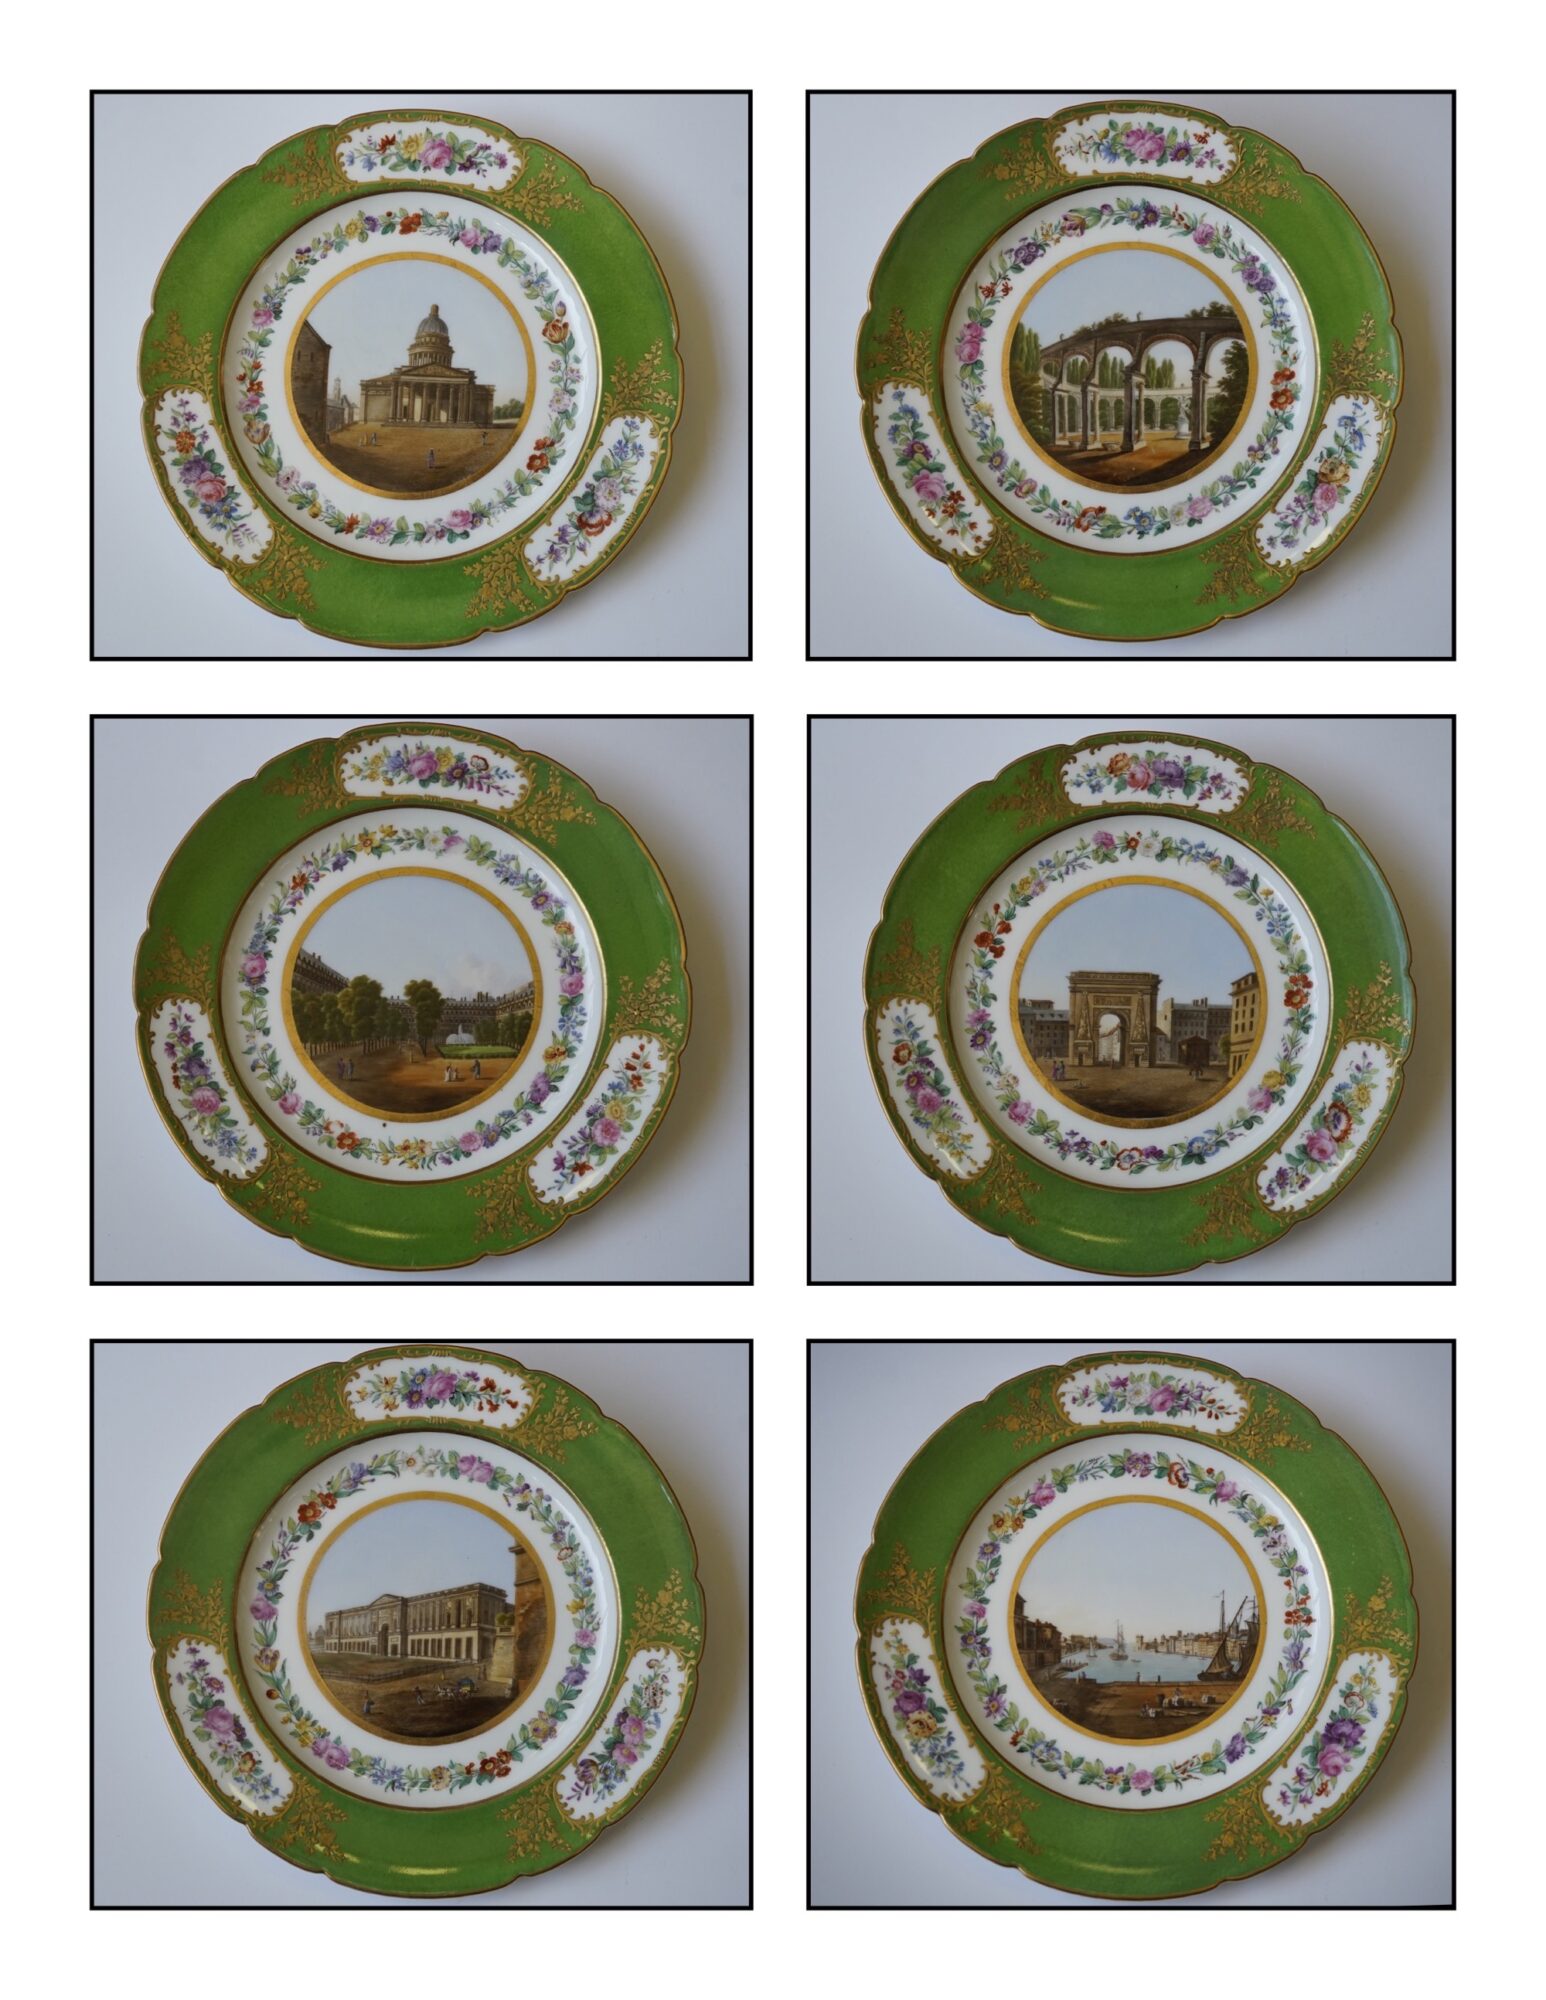 Paris Scenic service, 6pc with superb painted street scenes, by Feuillet c.1830